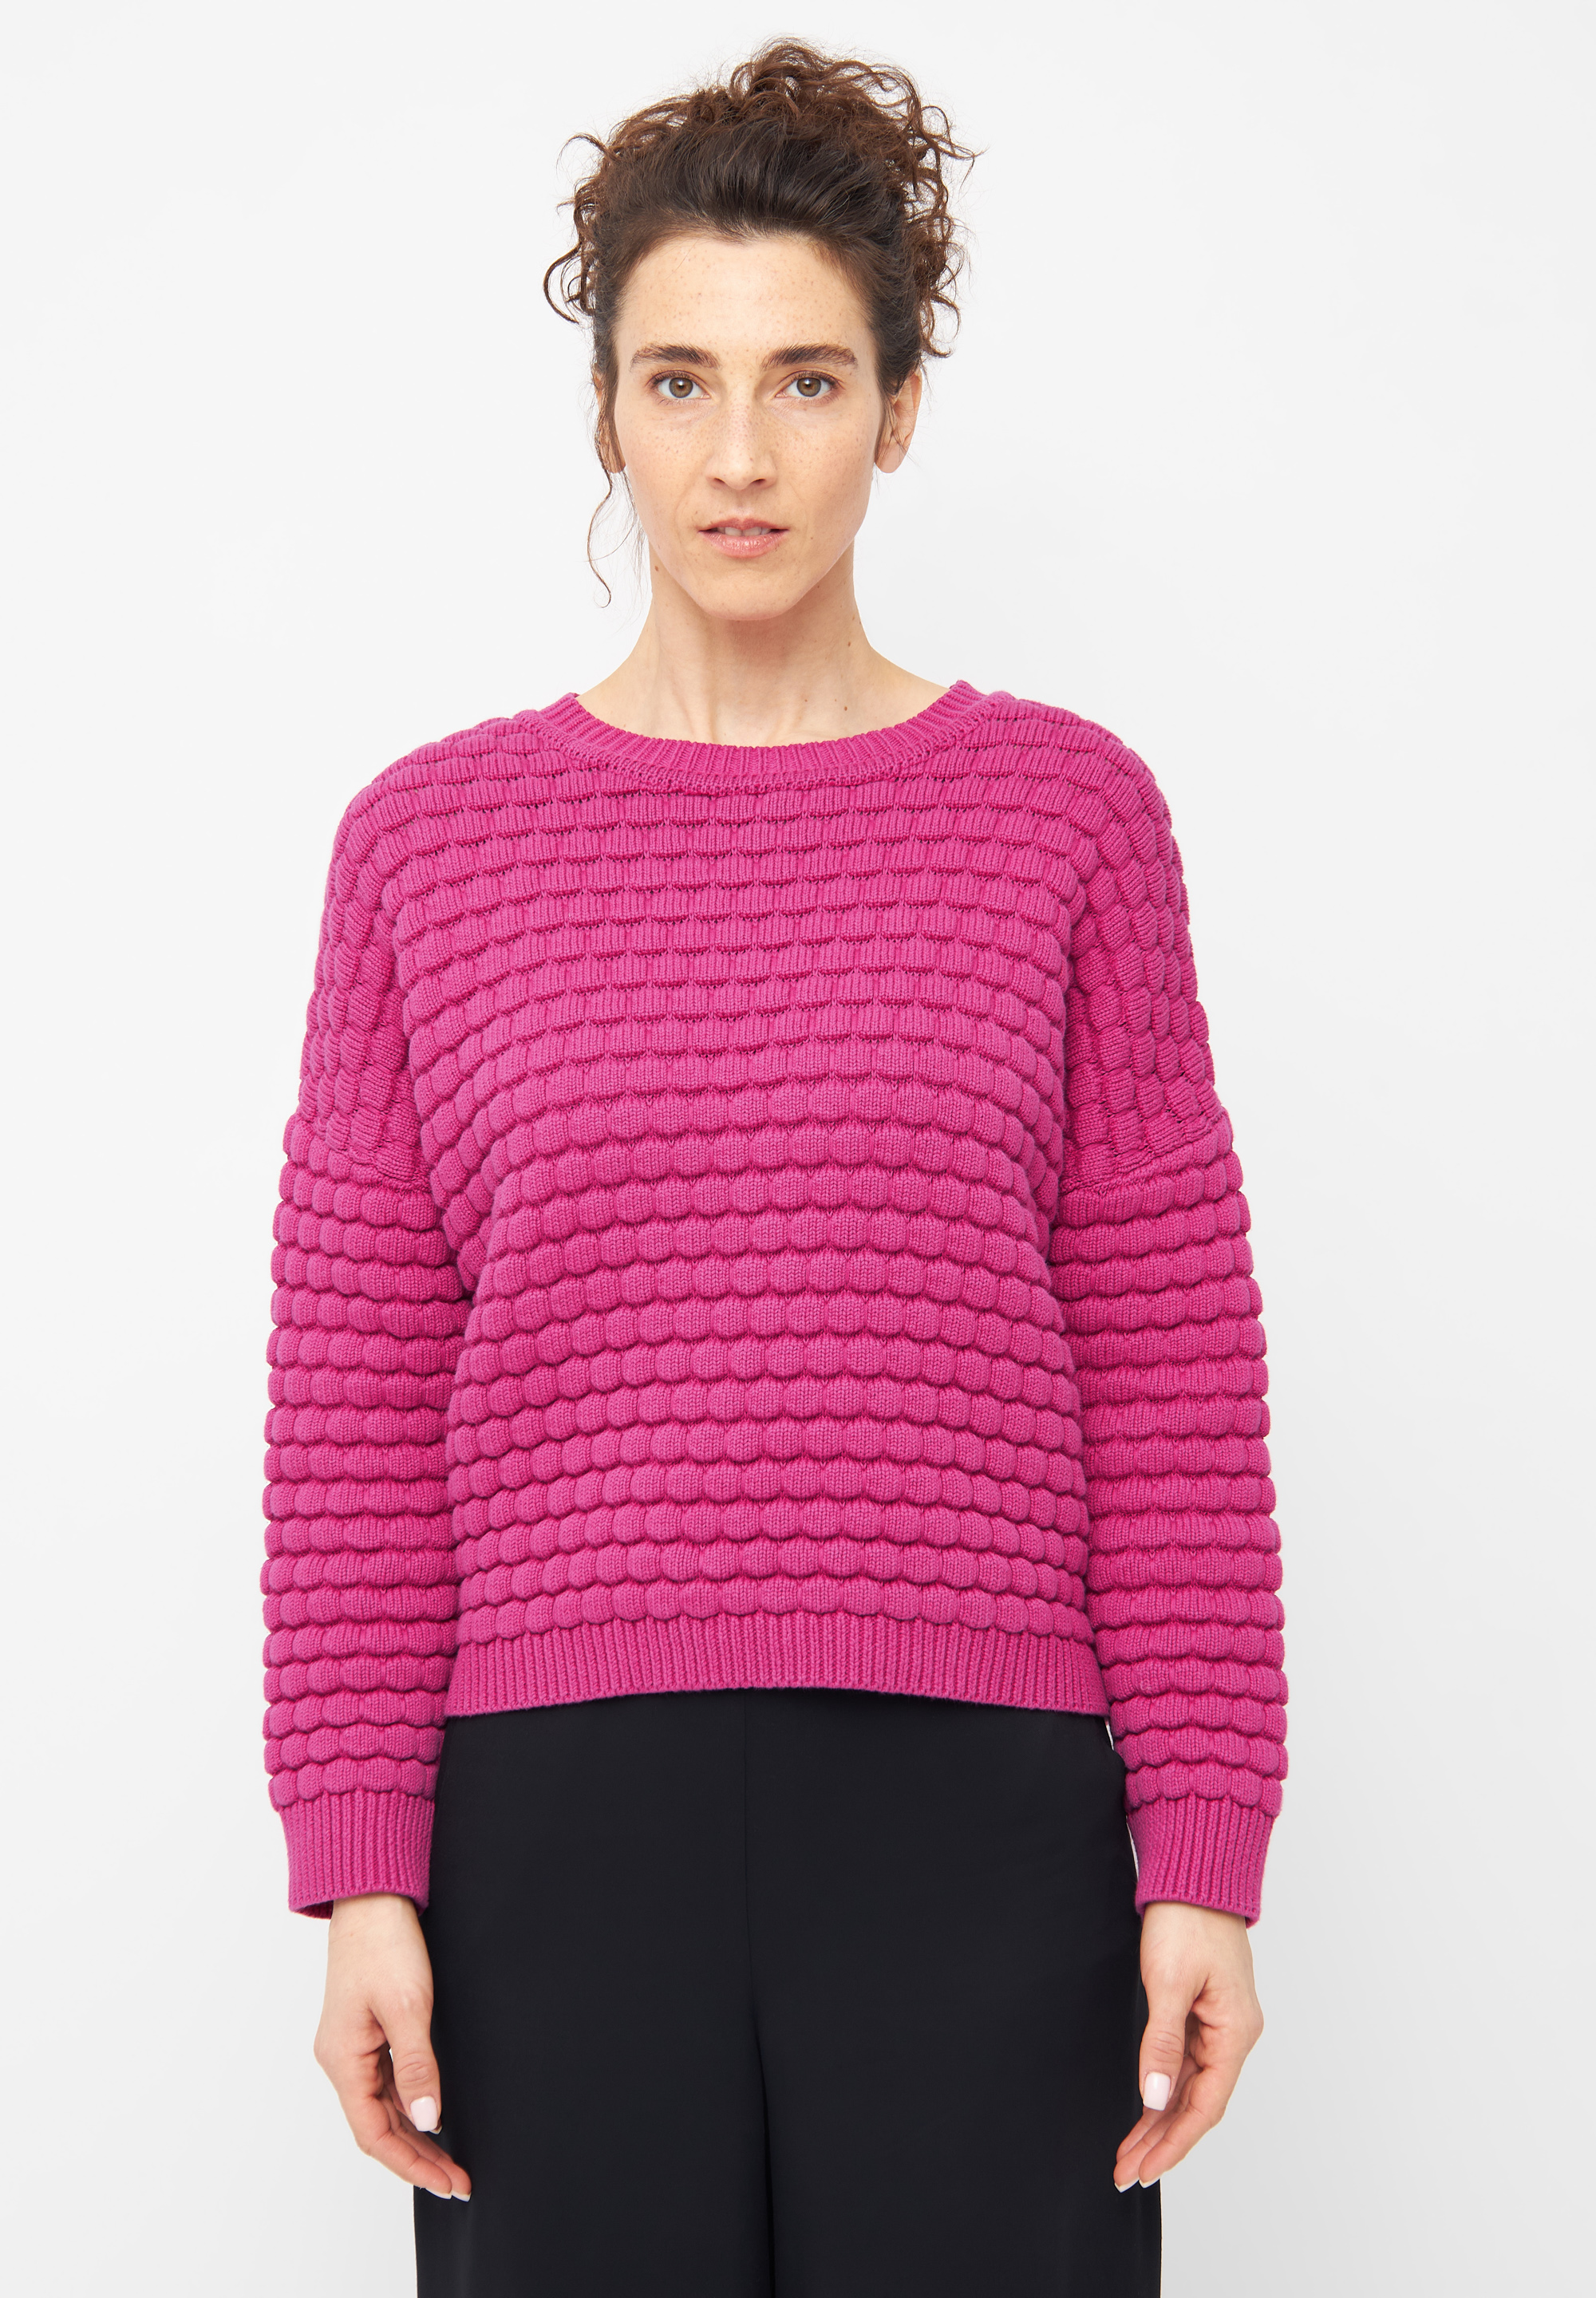 Givn Berlin Sweater GB-EMILY Farbe: berry pink